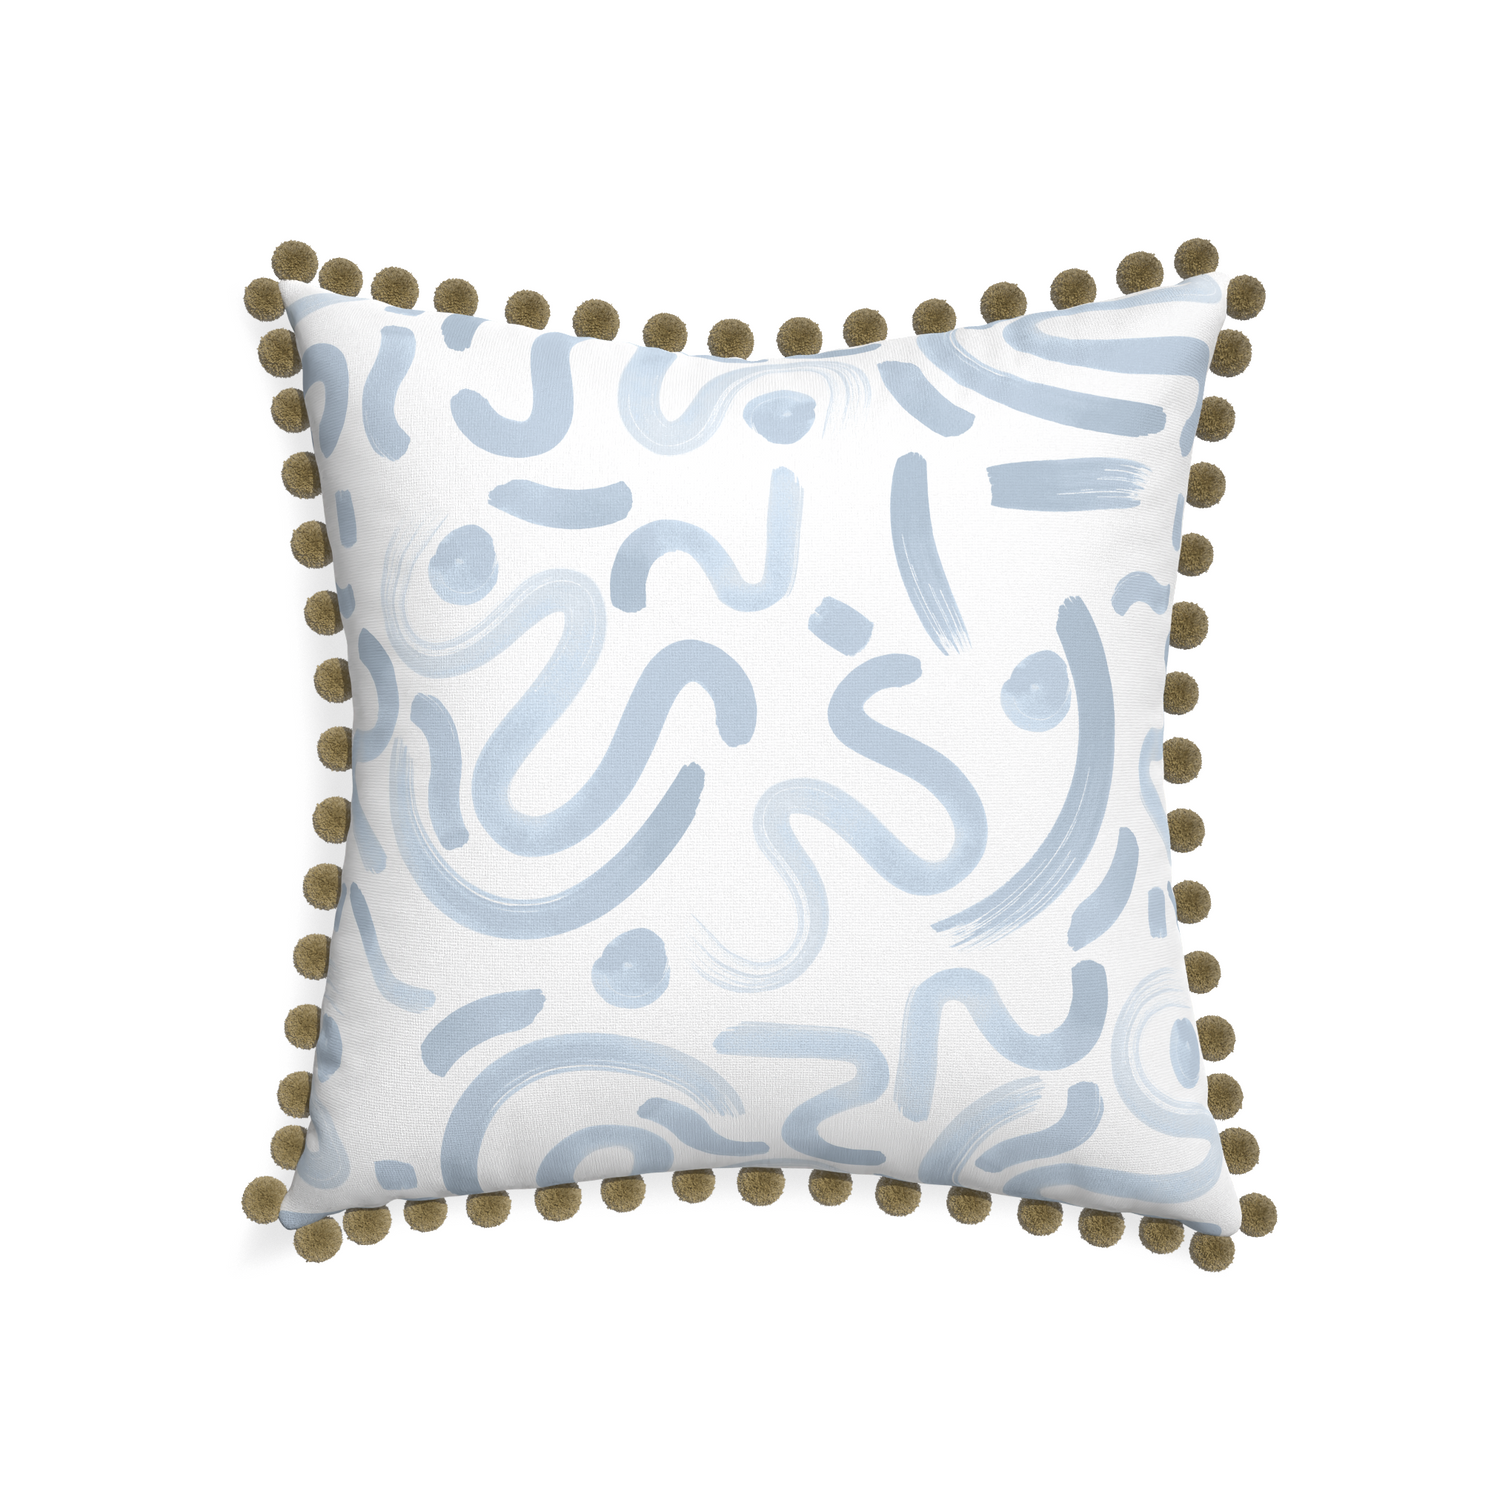 22-square hockney sky custom abstract sky bluepillow with olive pom pom on white background